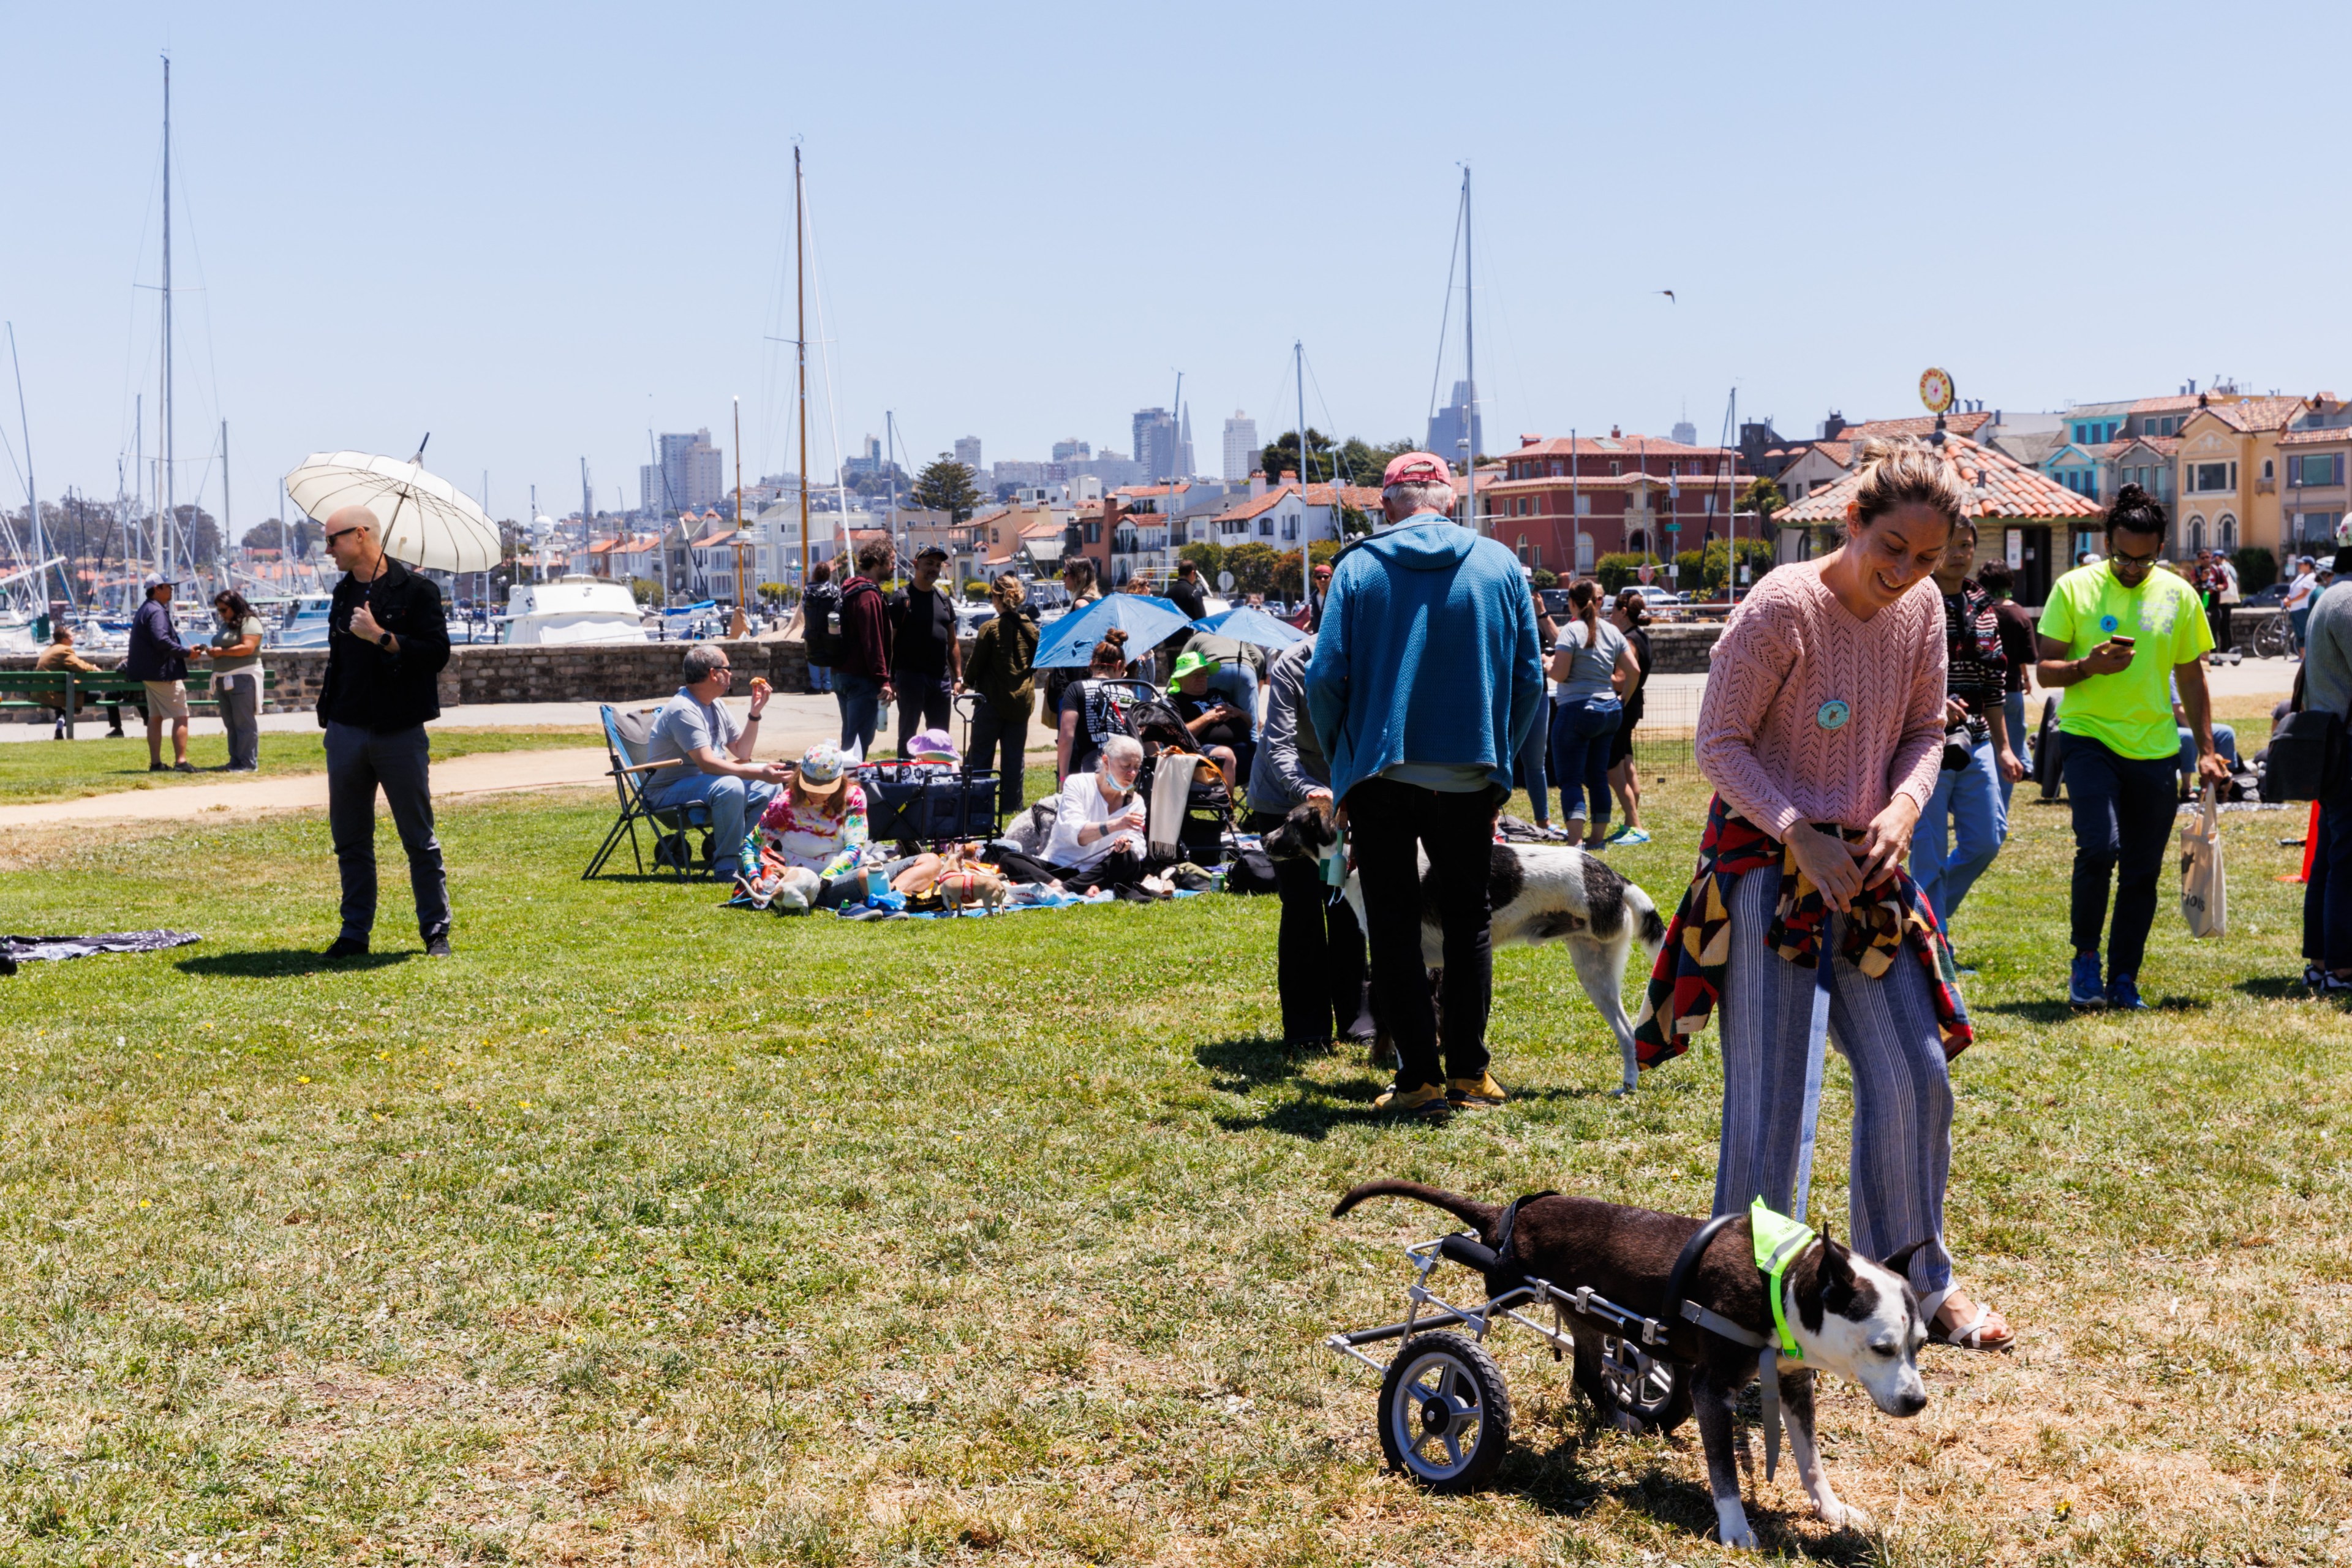 People are gathered at a park near a marina, sitting on the grass and socializing. A woman is helping a dog in a wheelchair, others are relaxing under umbrellas.